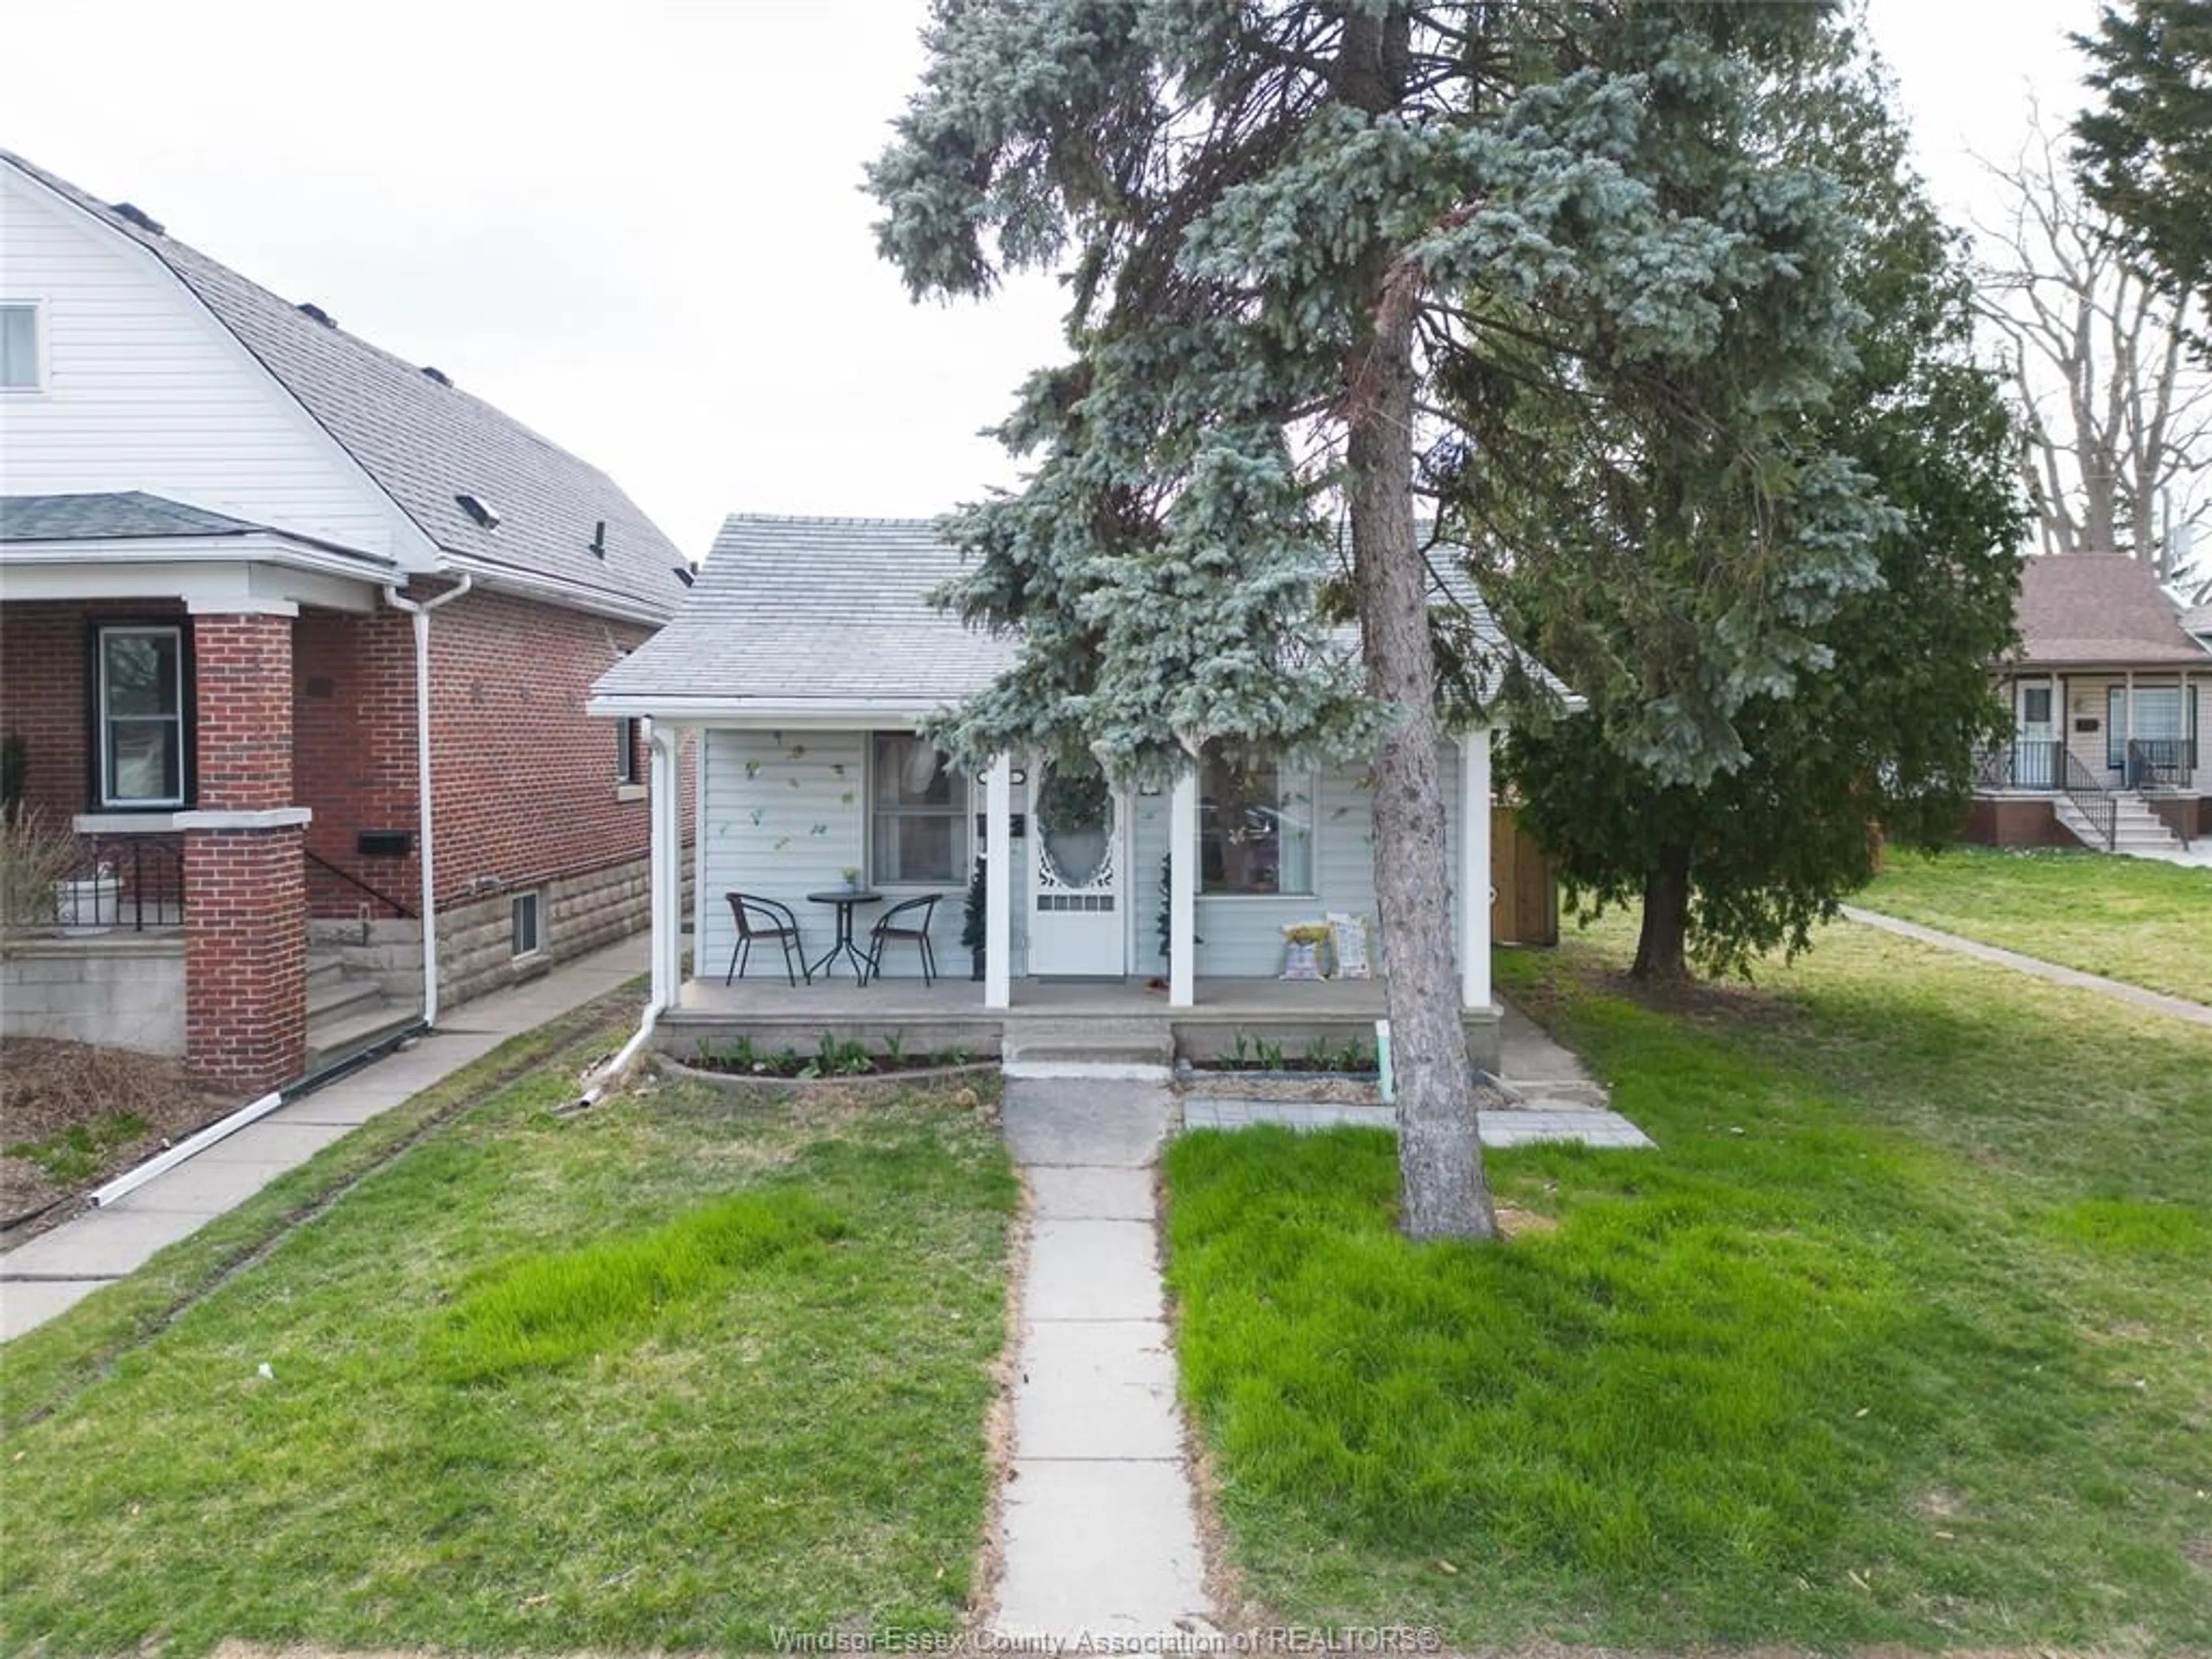 Frontside or backside of a home for 1743 LANGLOIS Ave, Windsor Ontario N8X 4M4